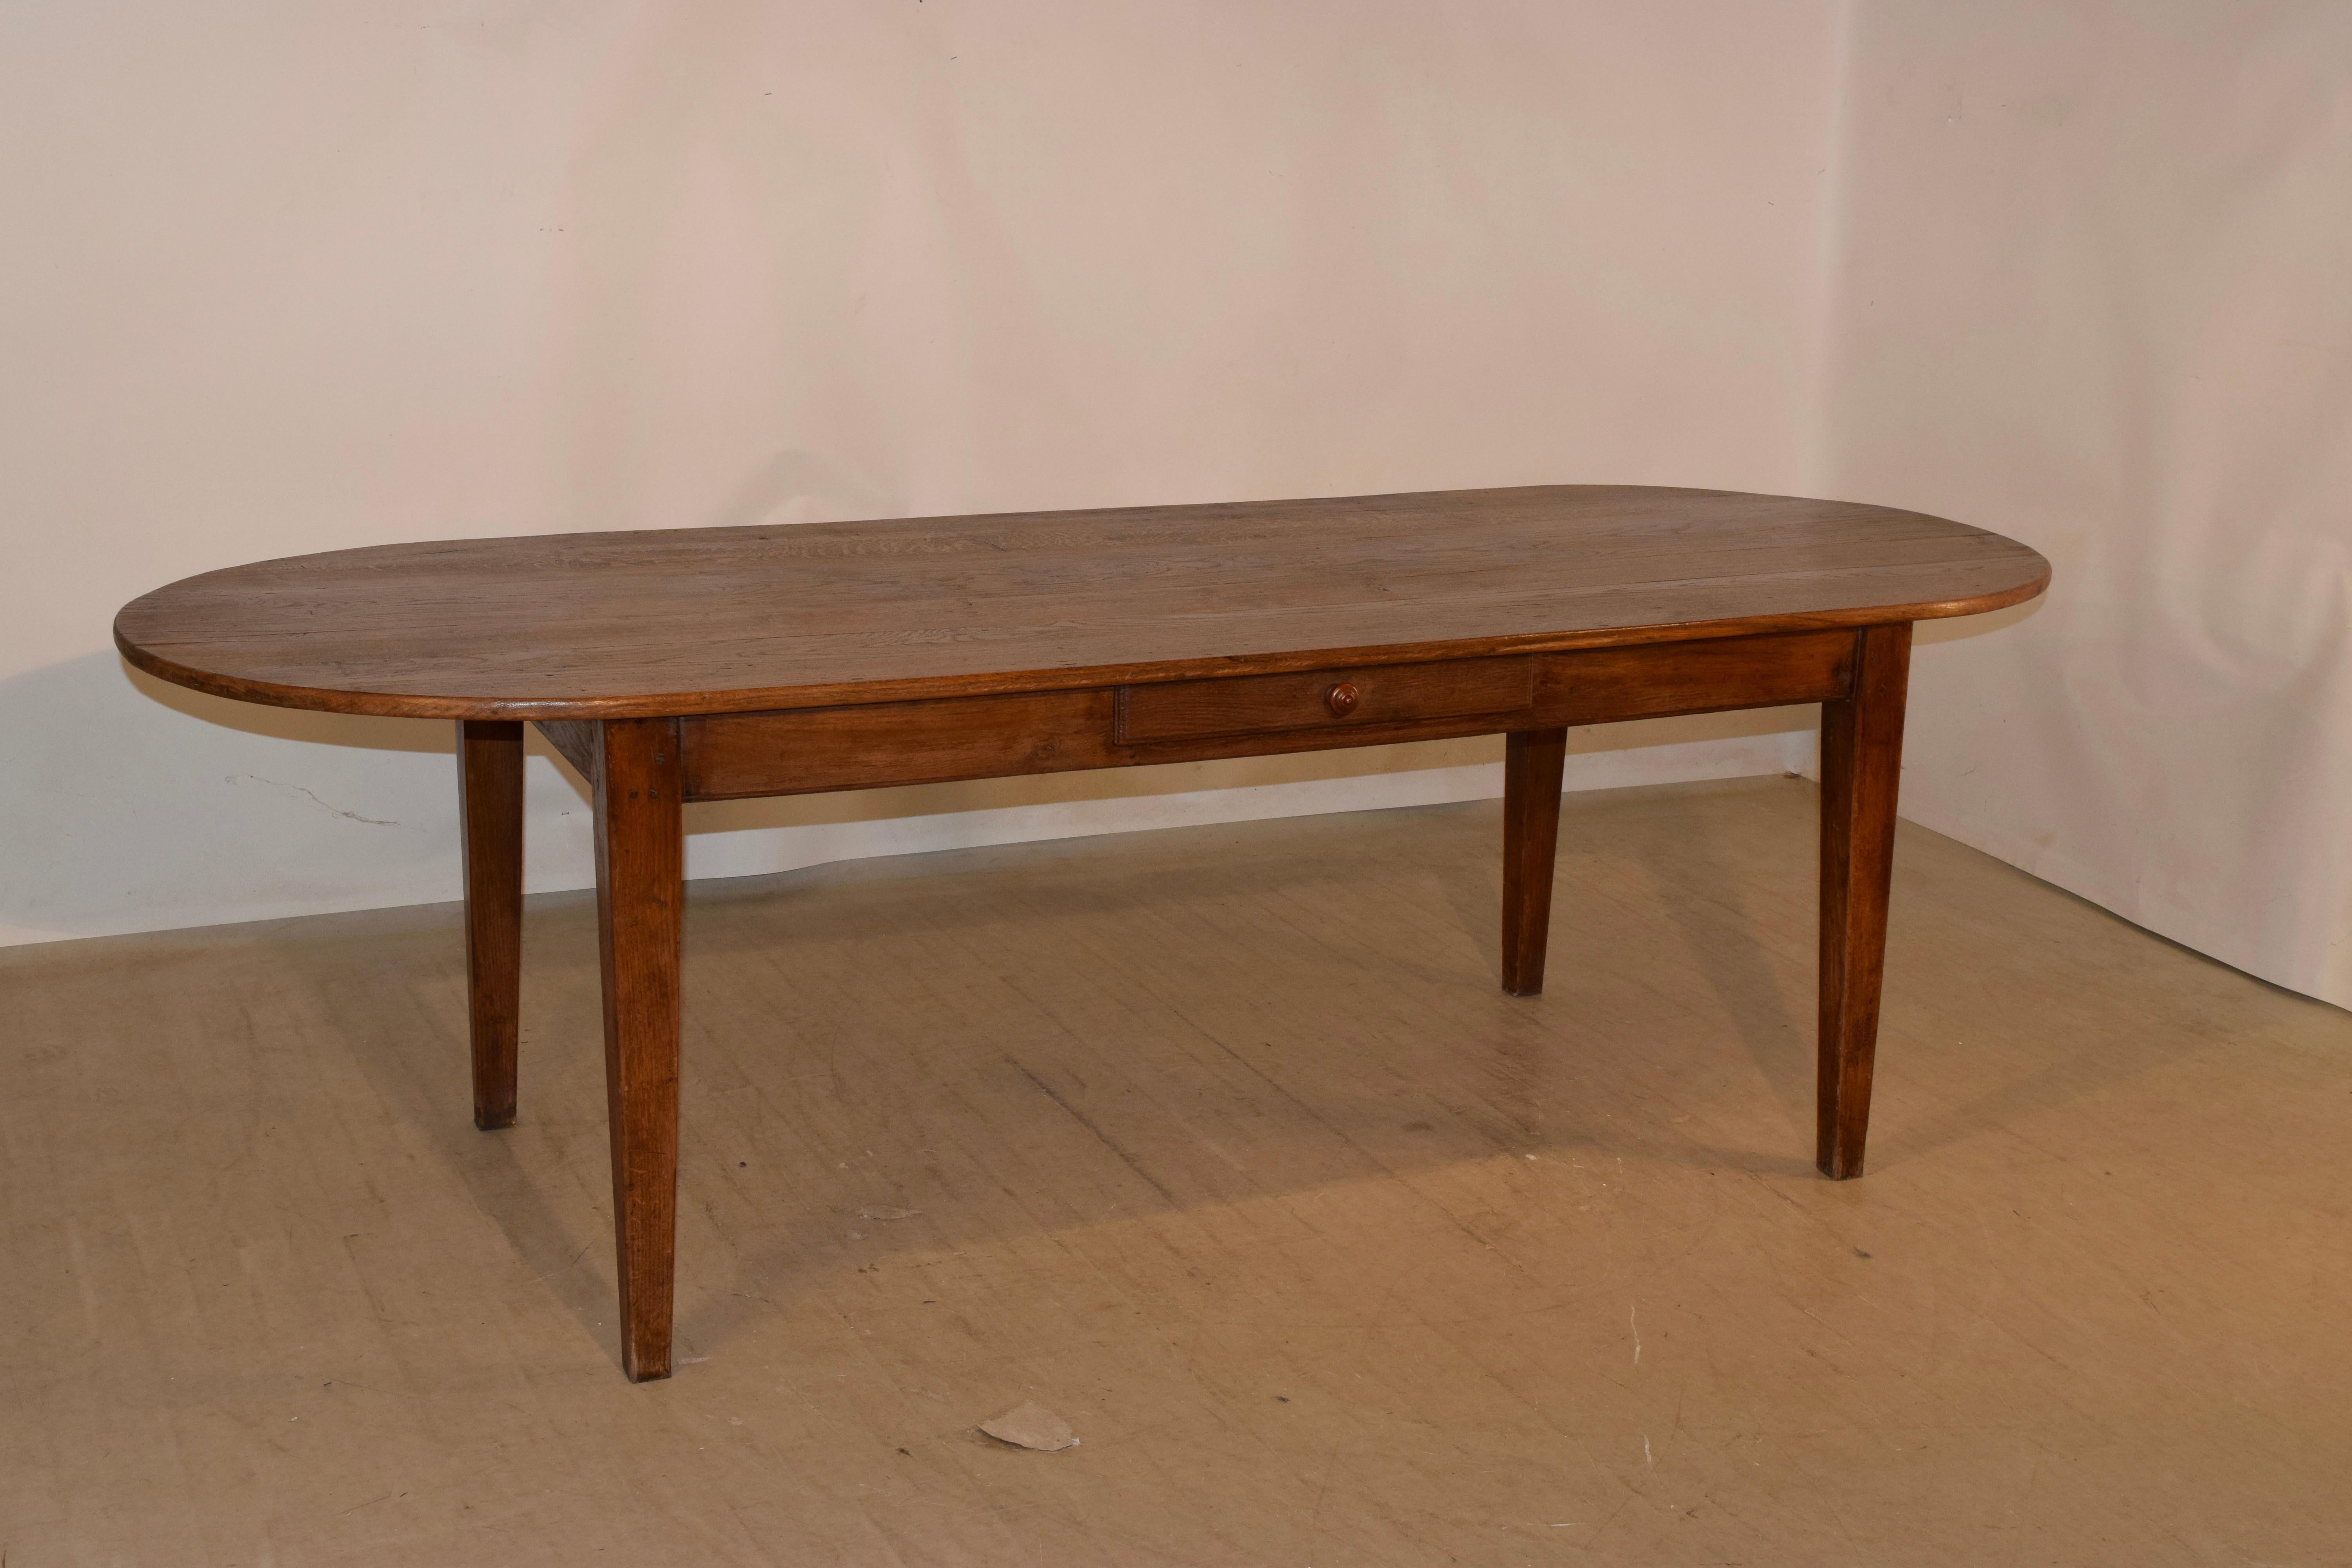 18th century chestnut farm table from France with a plank top and oval shaped ends, following down to a simple apron, which contains a single drawer, over tapered legs. The apron measures 24 inches in height.